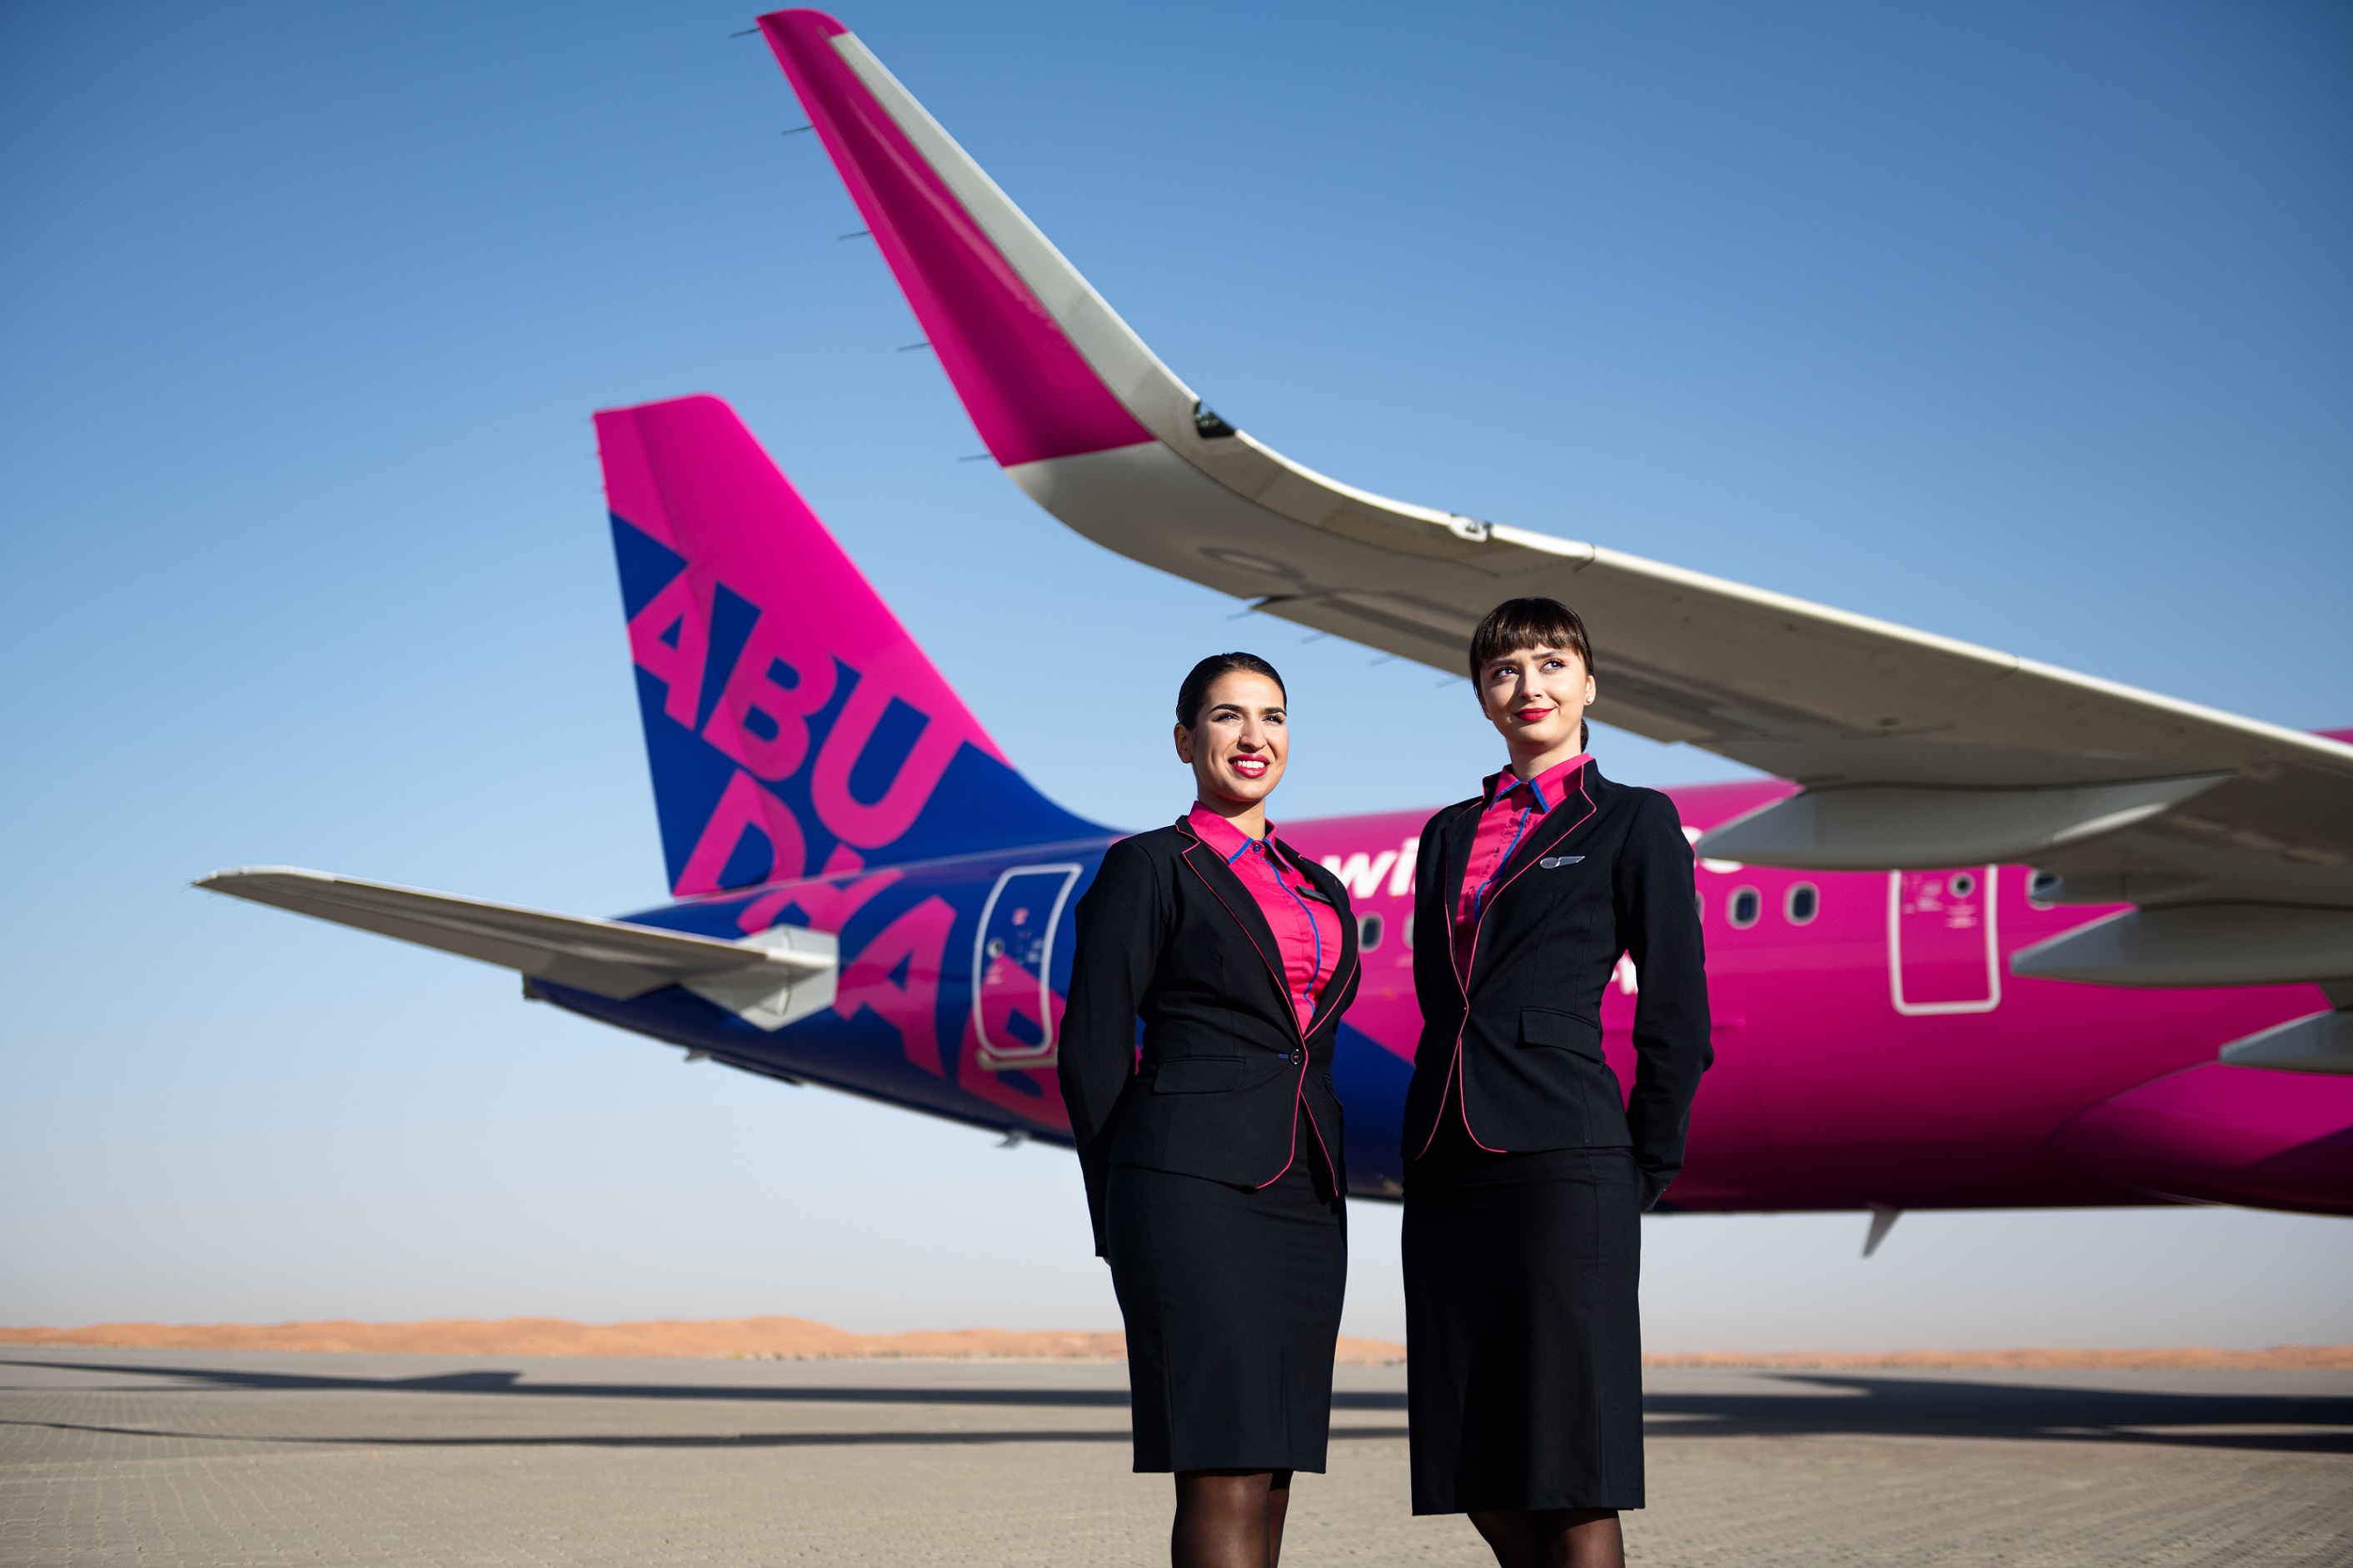 2,021 Tickets For Only AED 1! Wizz Air Abu Dhabi Celebrates The New Year With Ultra Low Fares To Greece